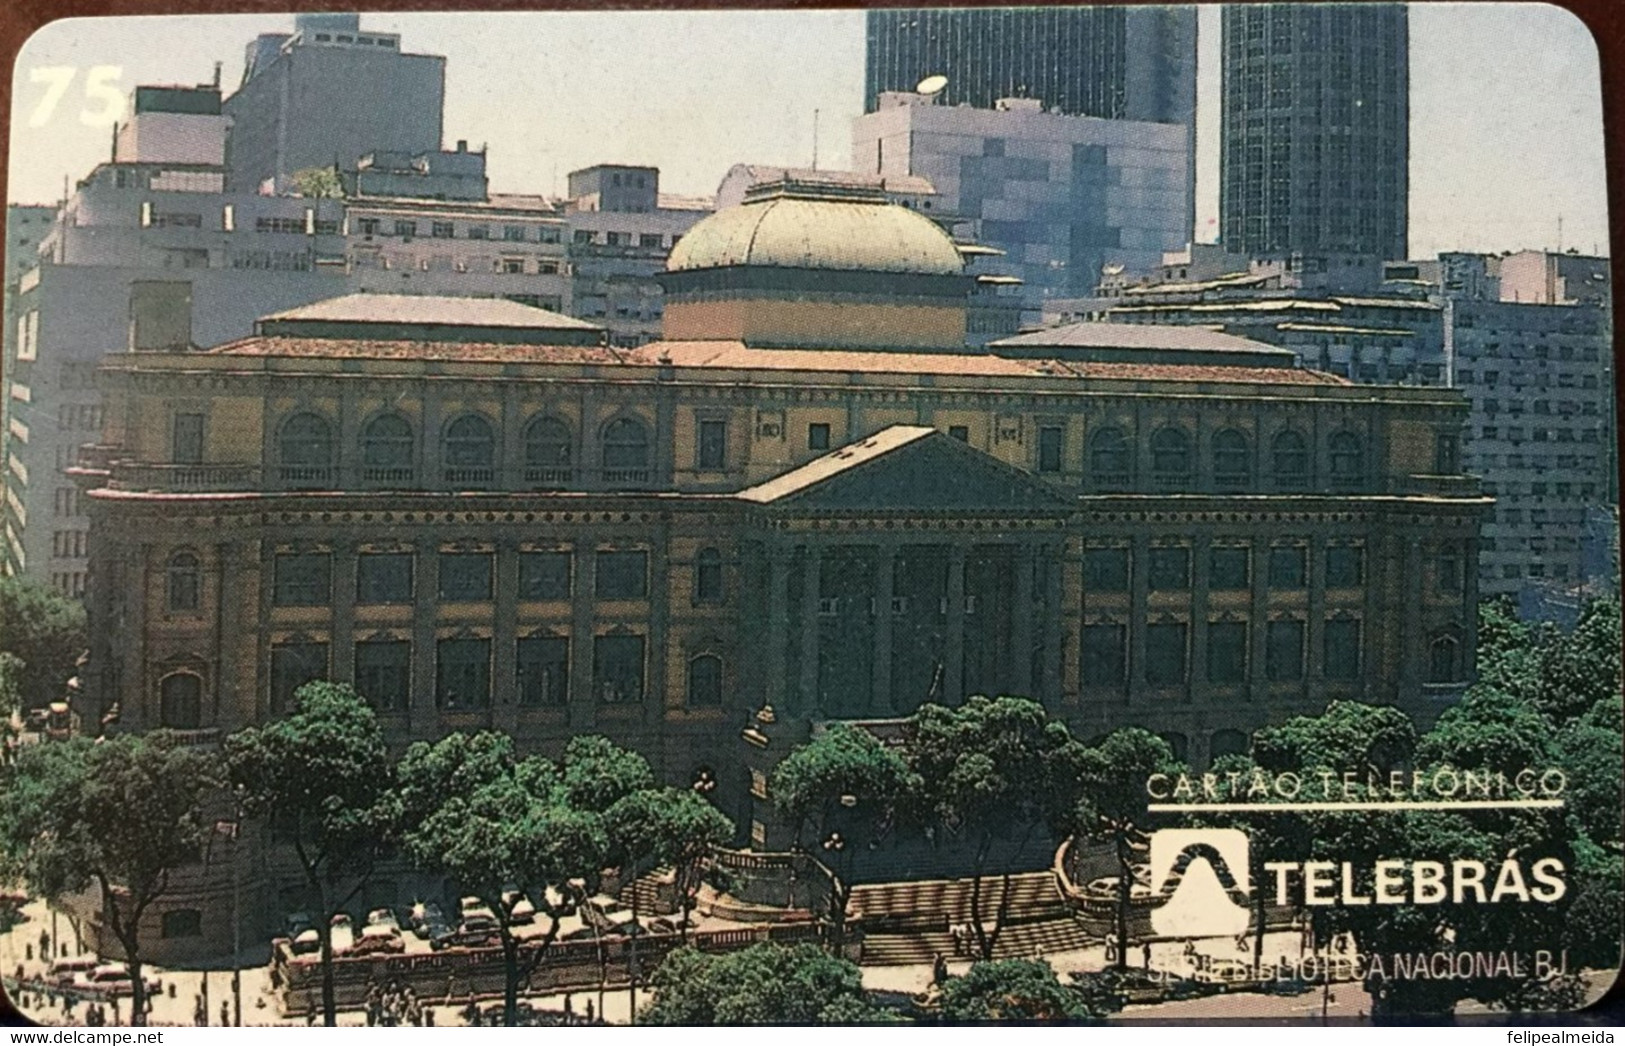 Phone Card Produced By Telebras In 1996 - Series National Library Of Rio De Janeiro - Photo Of The Building Headquarters - Cultura